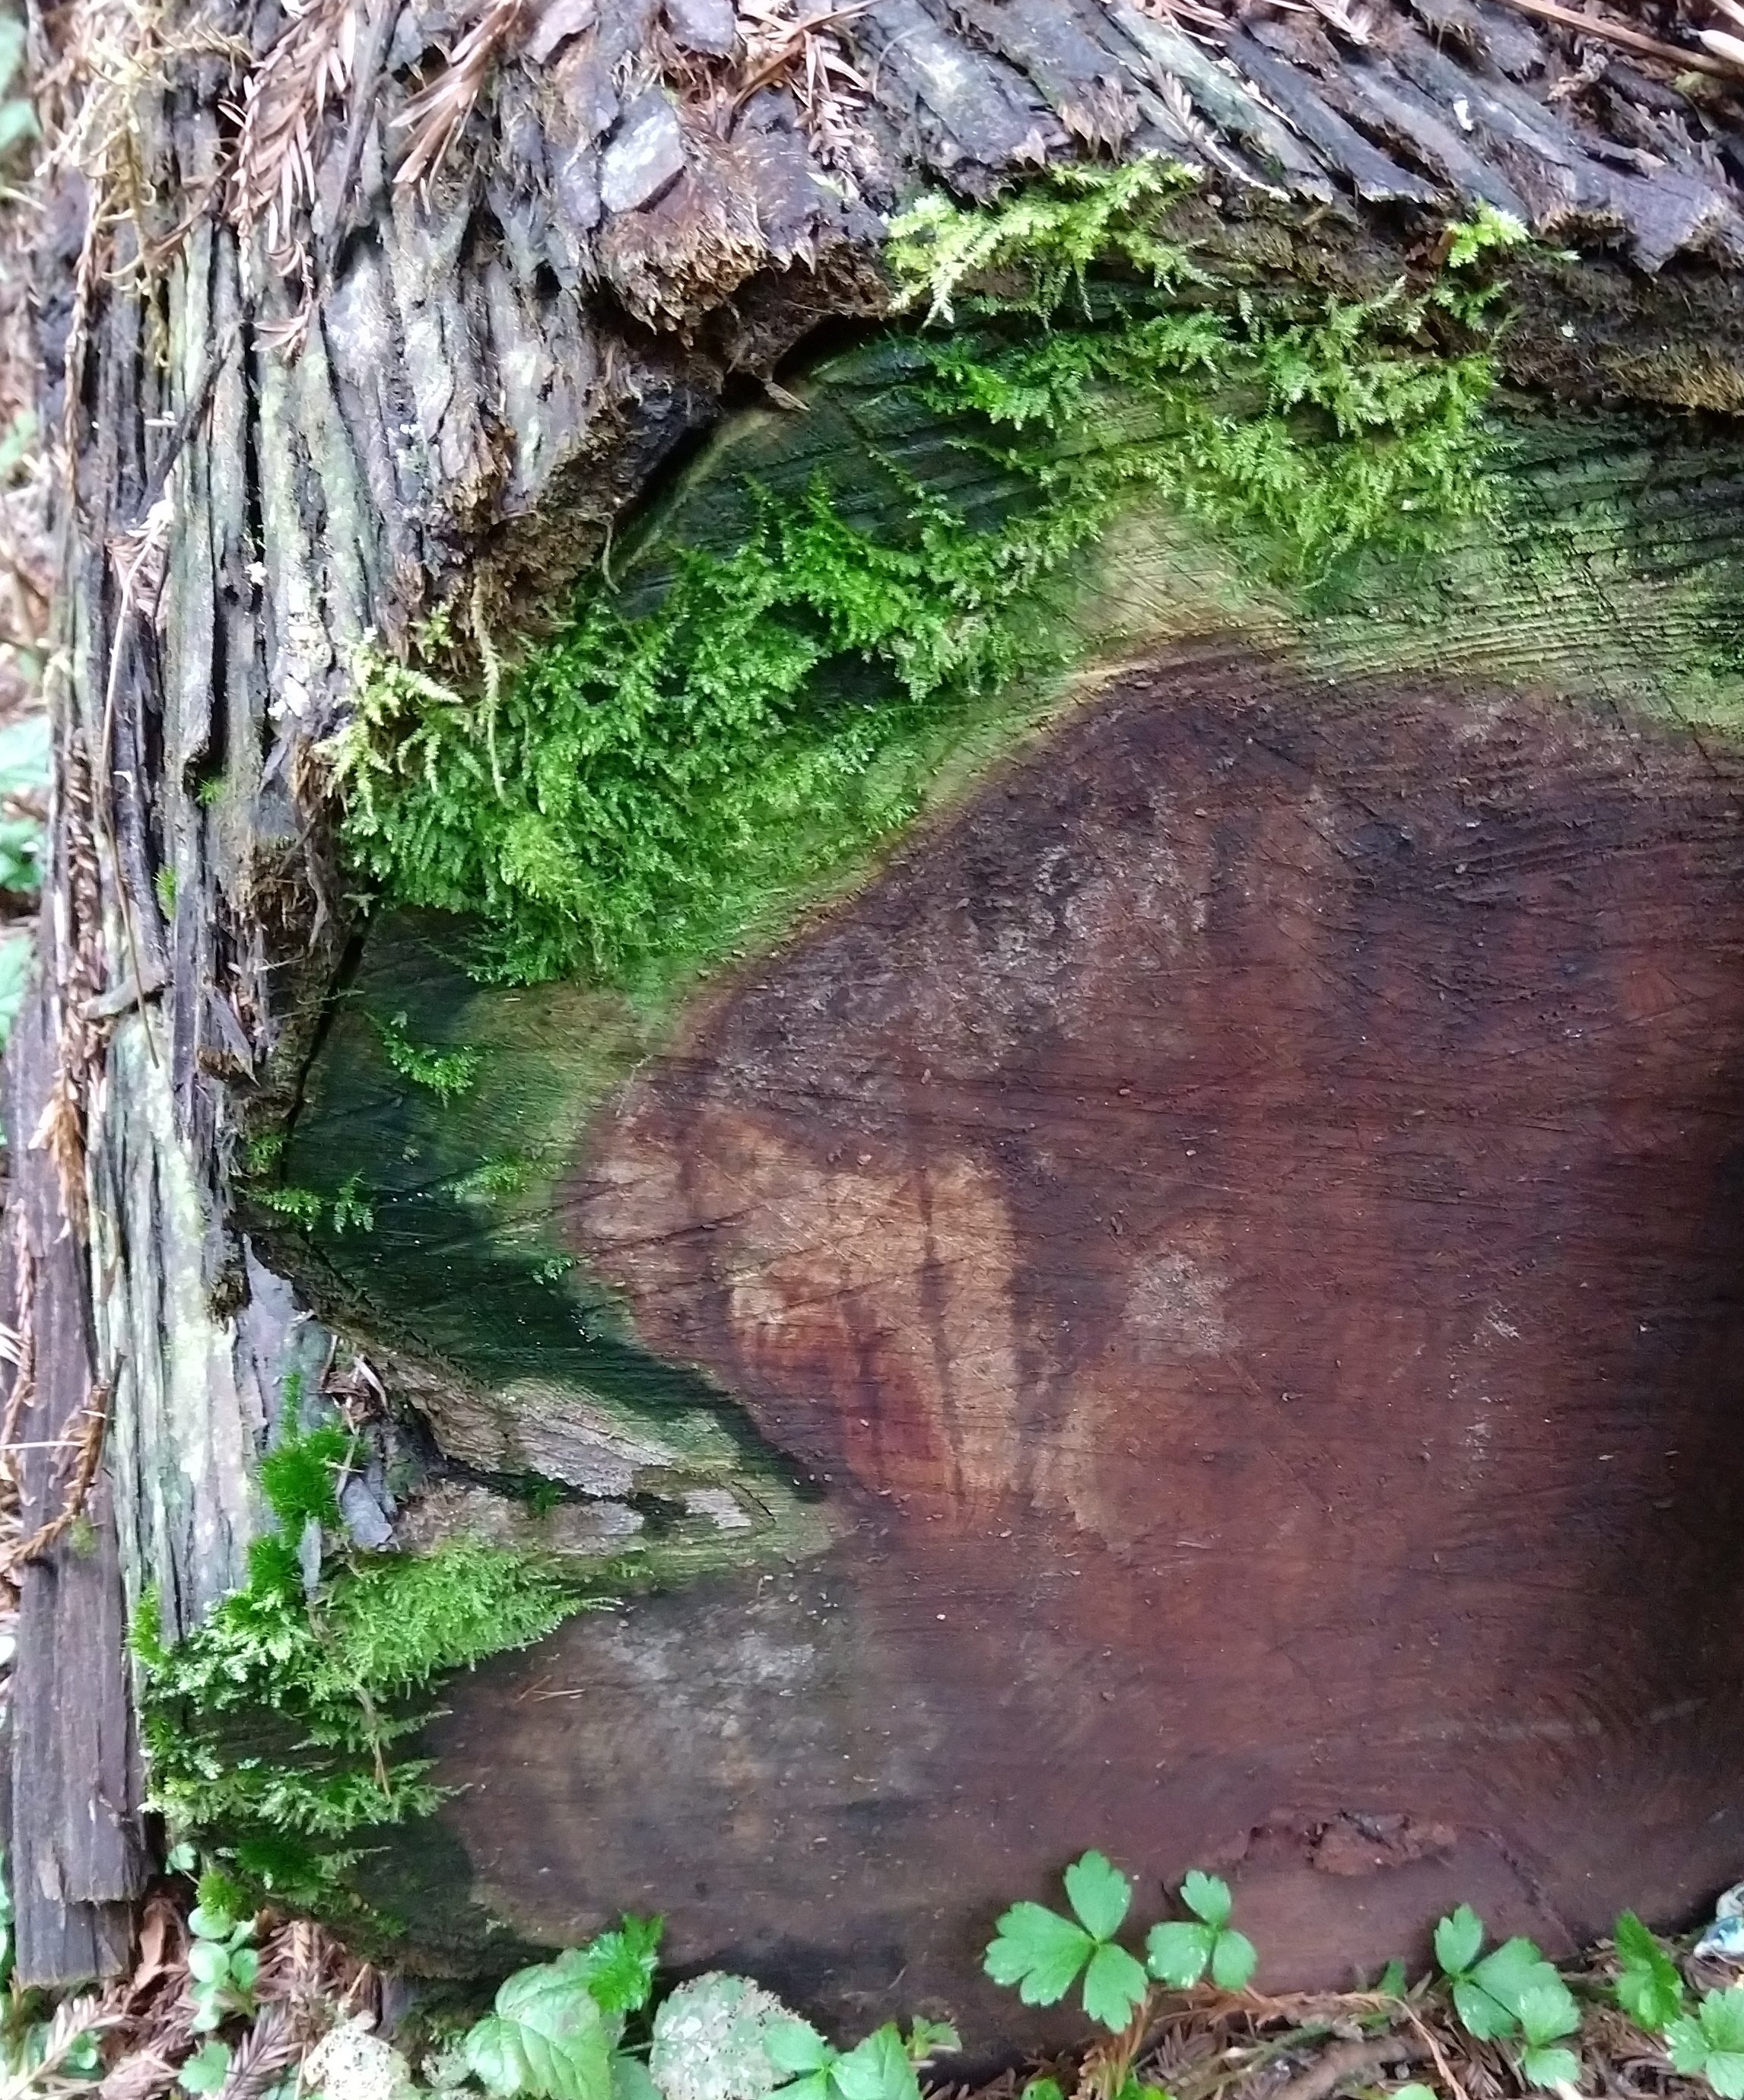 A cut log with moss and algae in the sapwood, but not in the heartwood